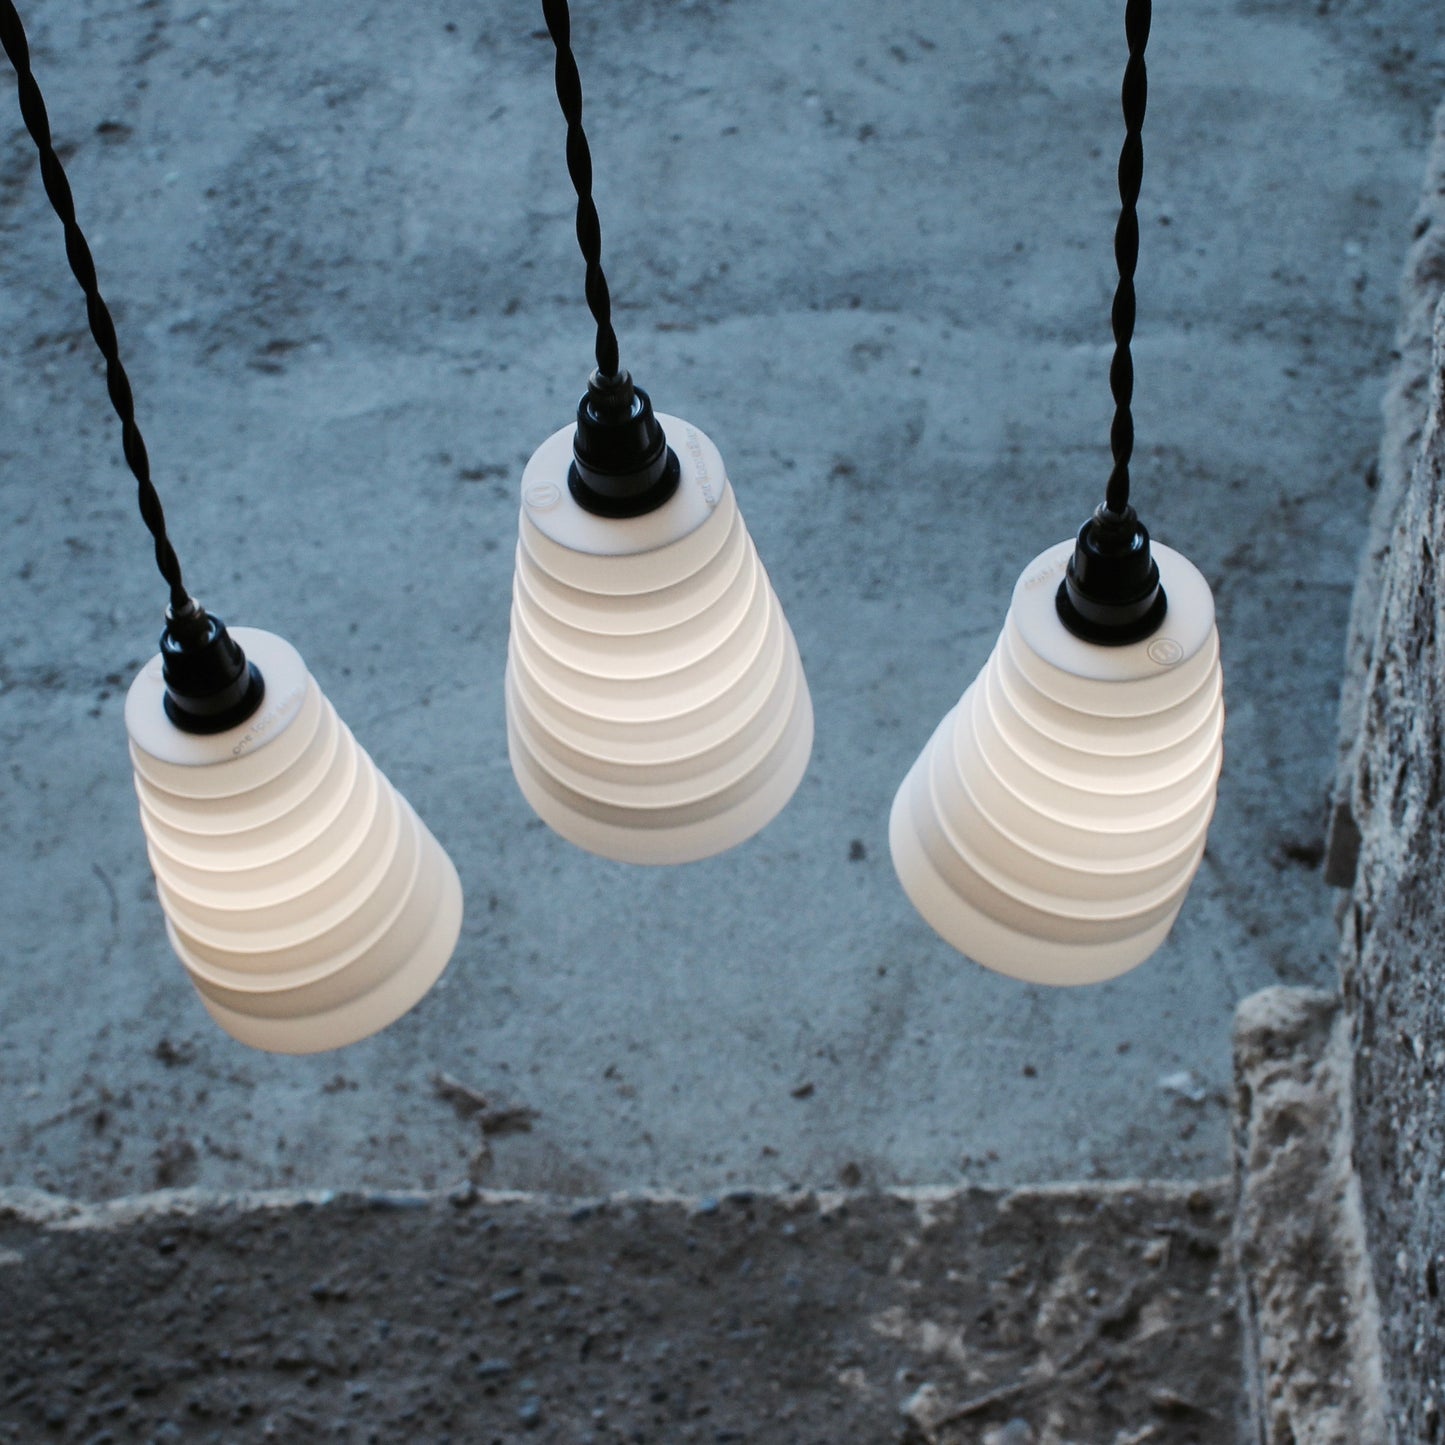 Whip 3-Drop Suspension lighting, directional lighting, malleable form, cultural lighting, 3Dprinted lampshade, LED 1W-4W